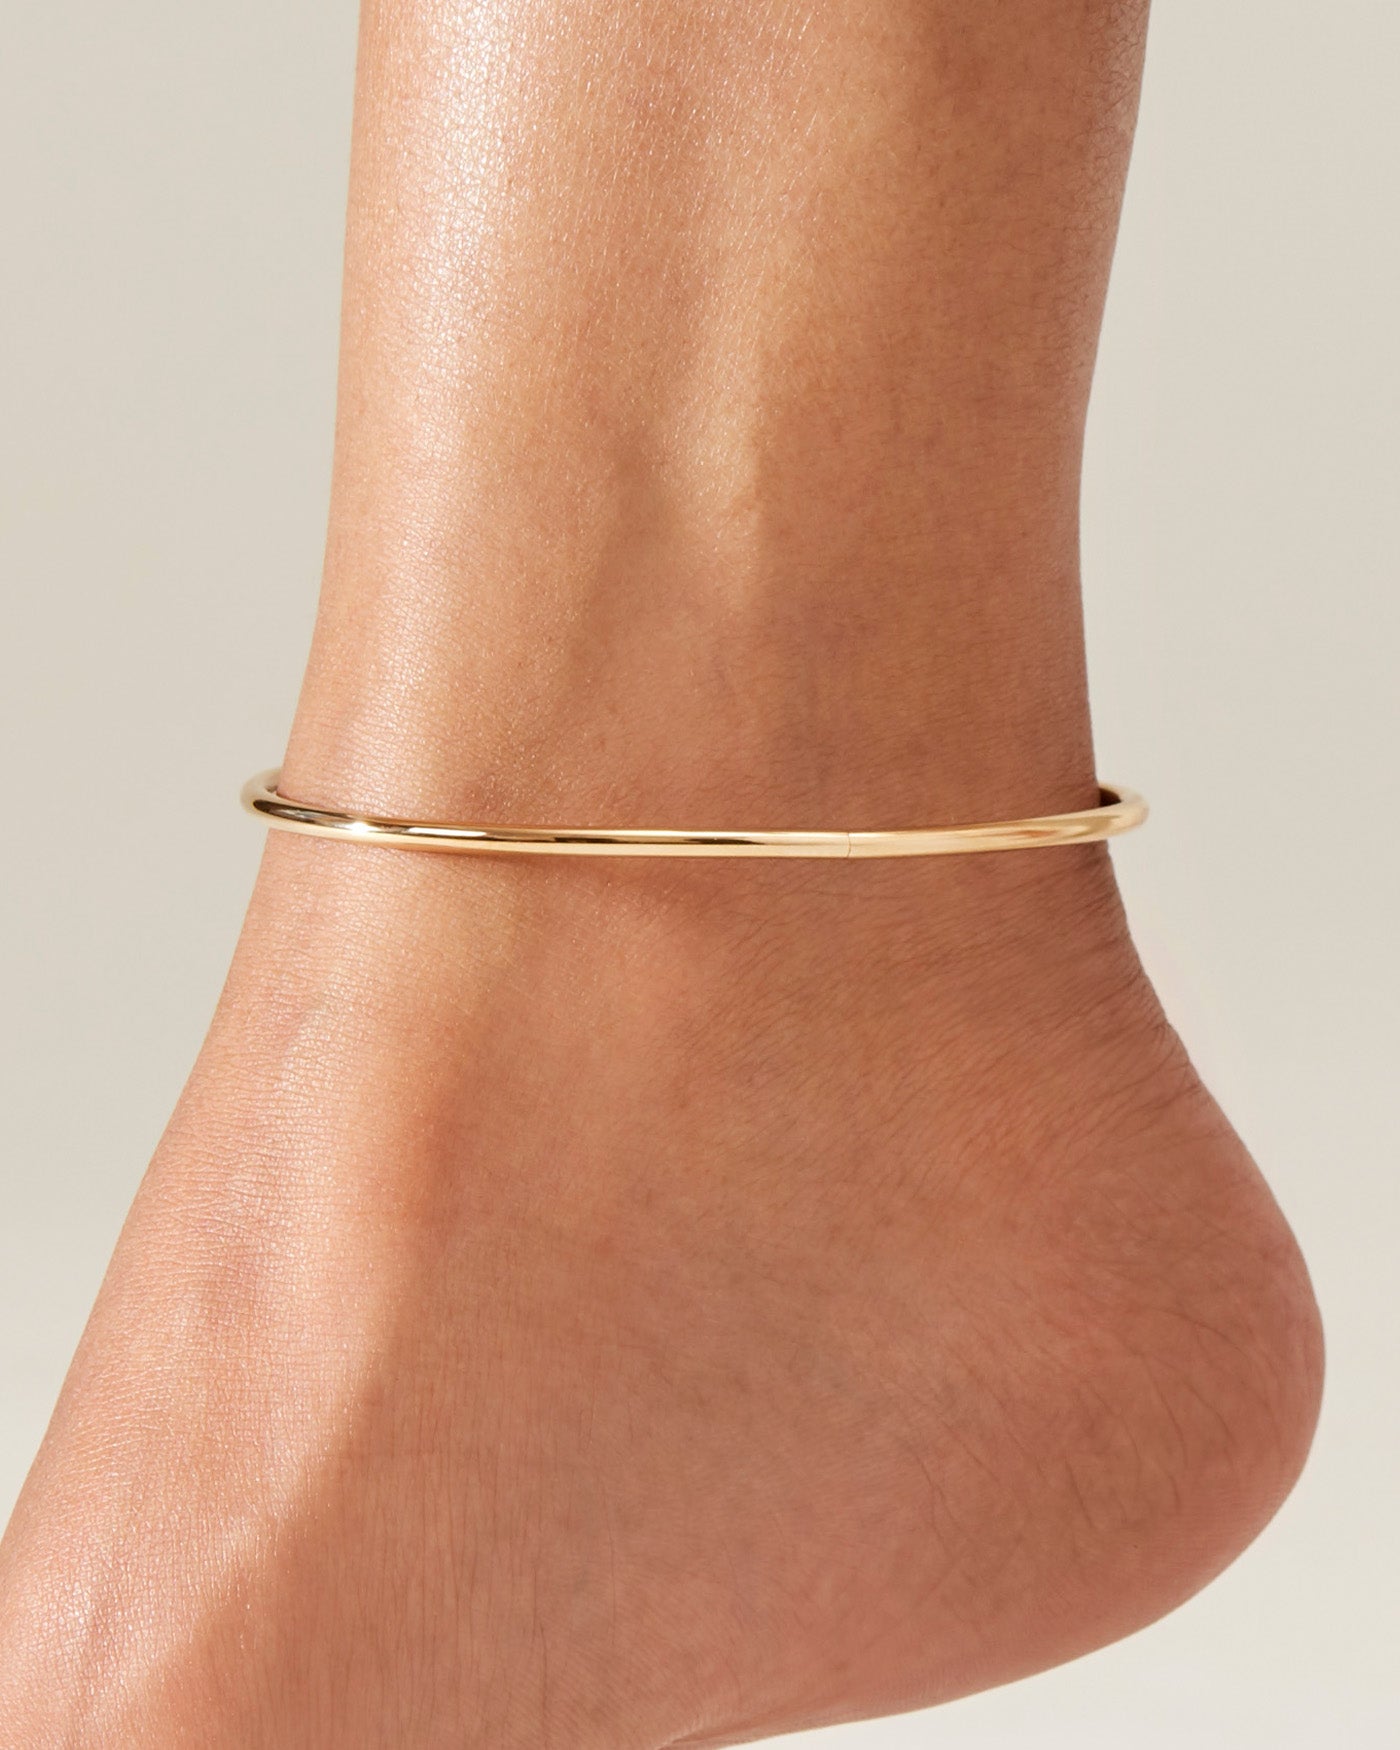 14K Gold Plated Ankle Bracelet Foot Chain 3 in 1 Women Anklet Gifts | eBay